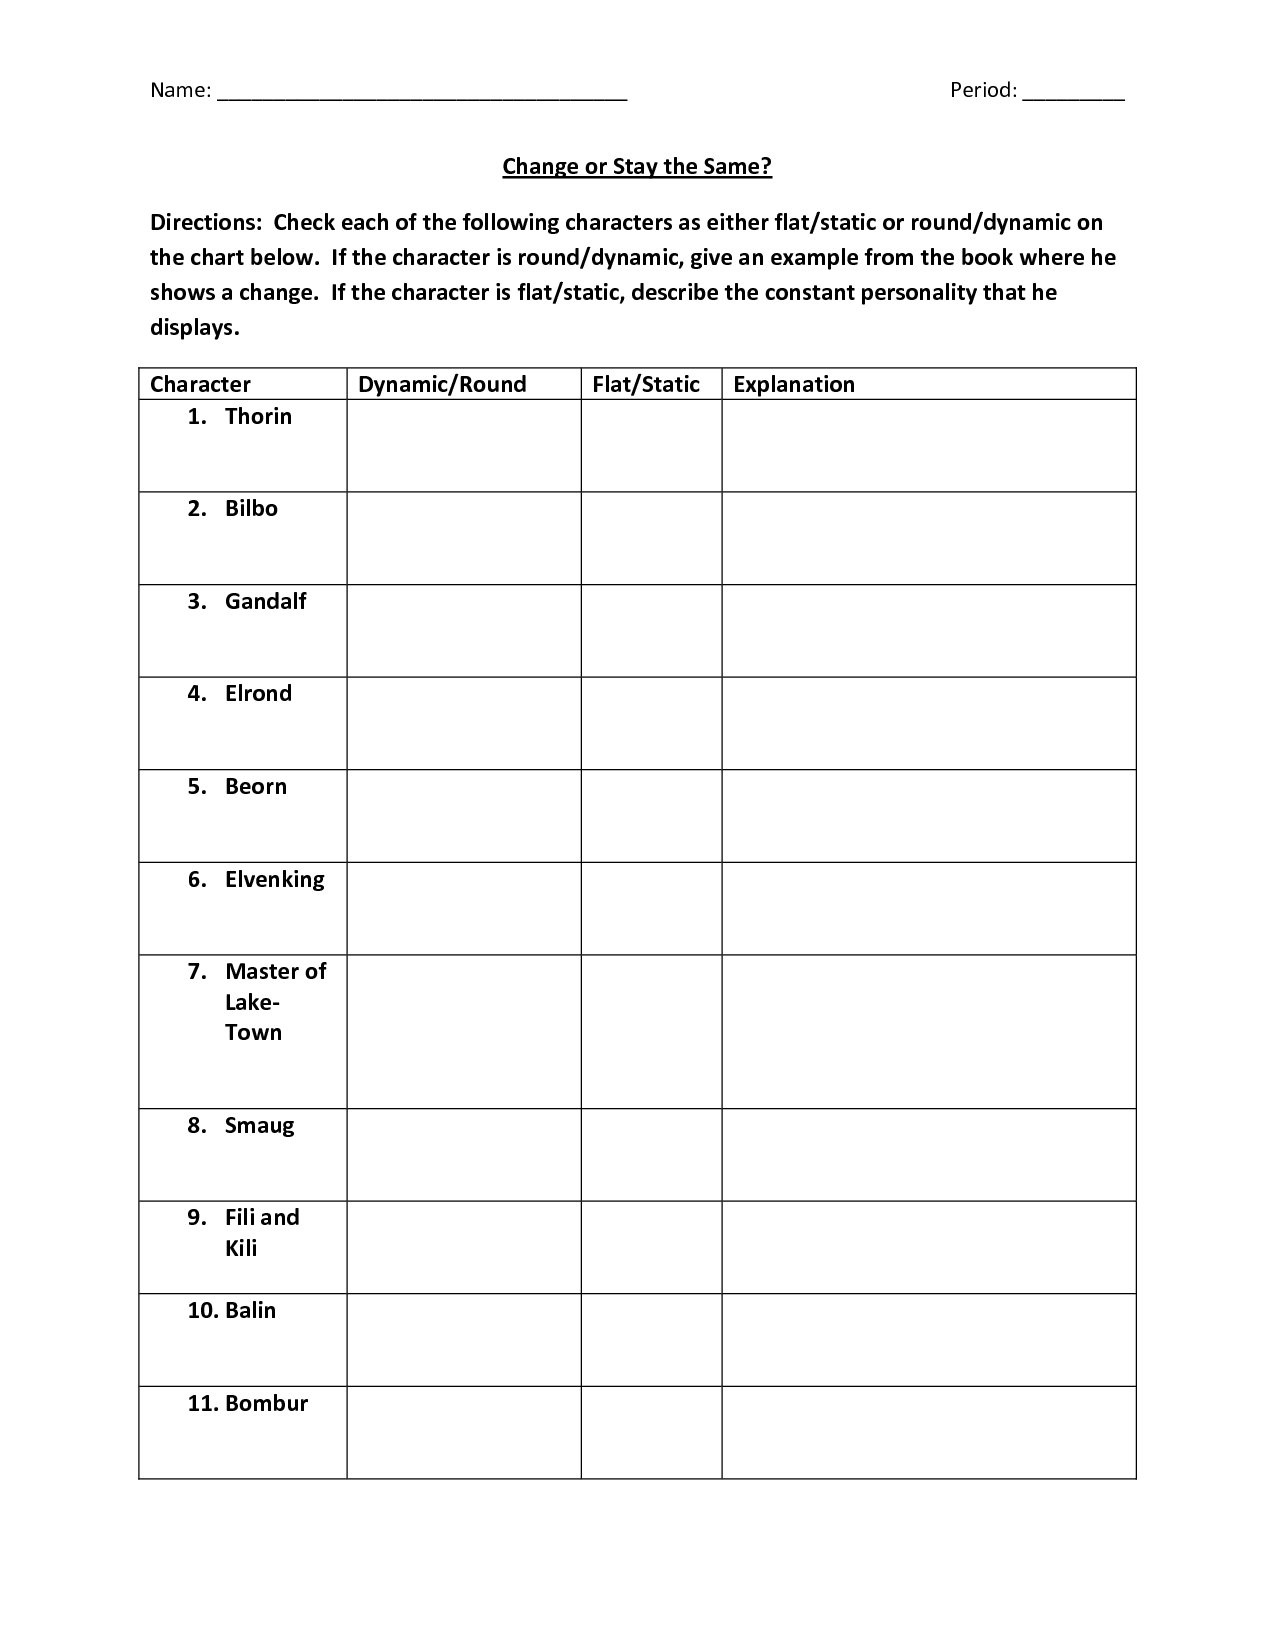 6-best-images-of-hierarchy-of-life-worksheet-erik-erikson-s-stages-of